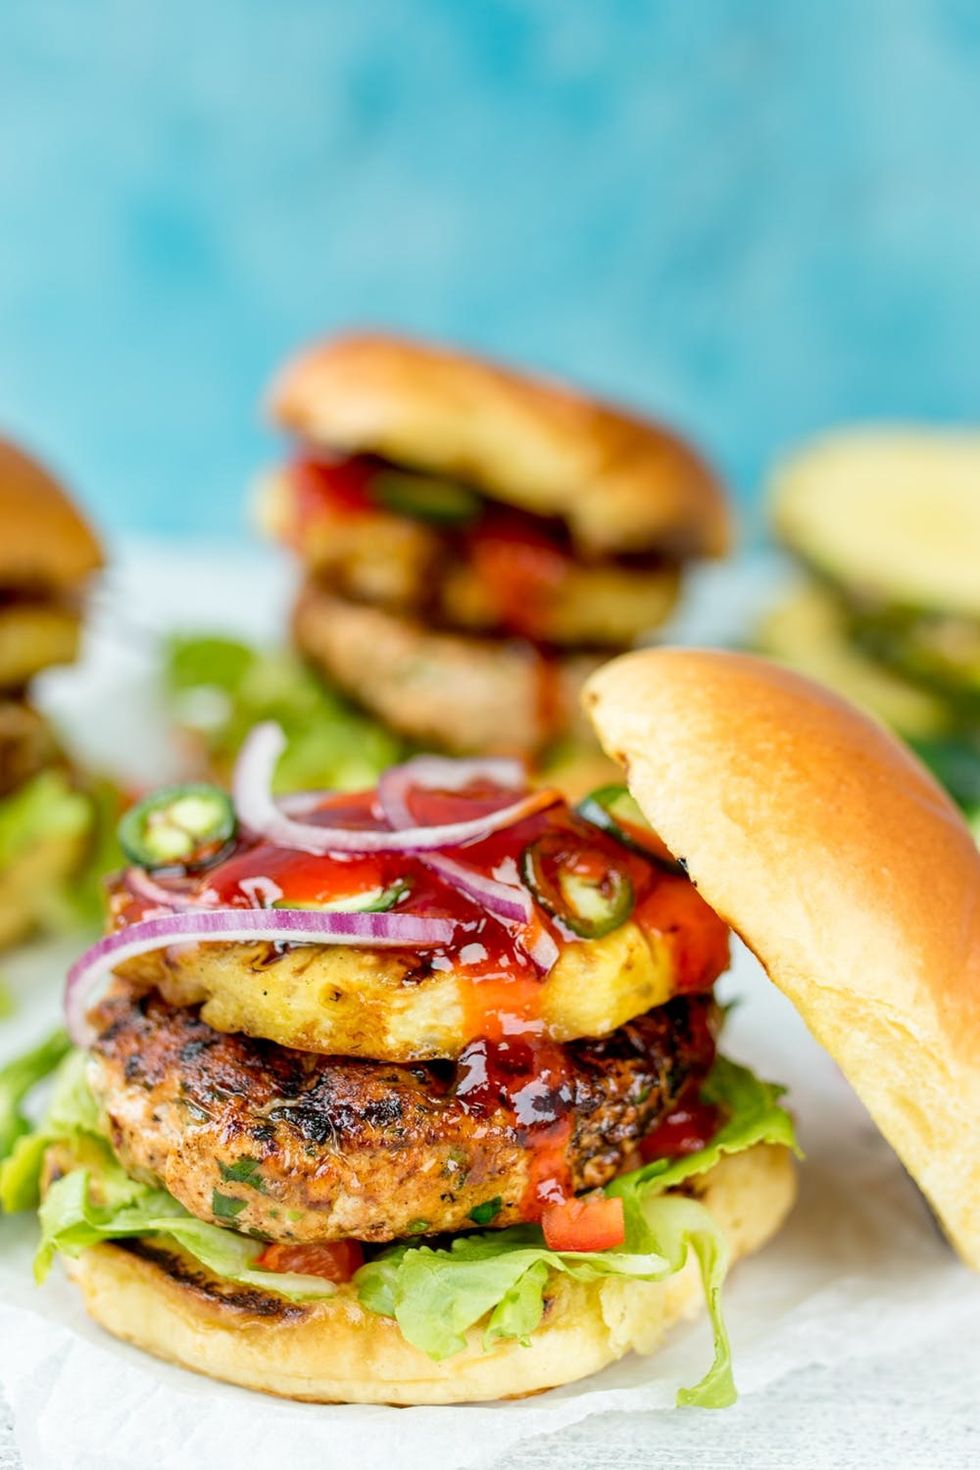 Try Our Hawaiian Salmon Burger With Grilled Pineapple Recipe For Your Weekend Barbecue!